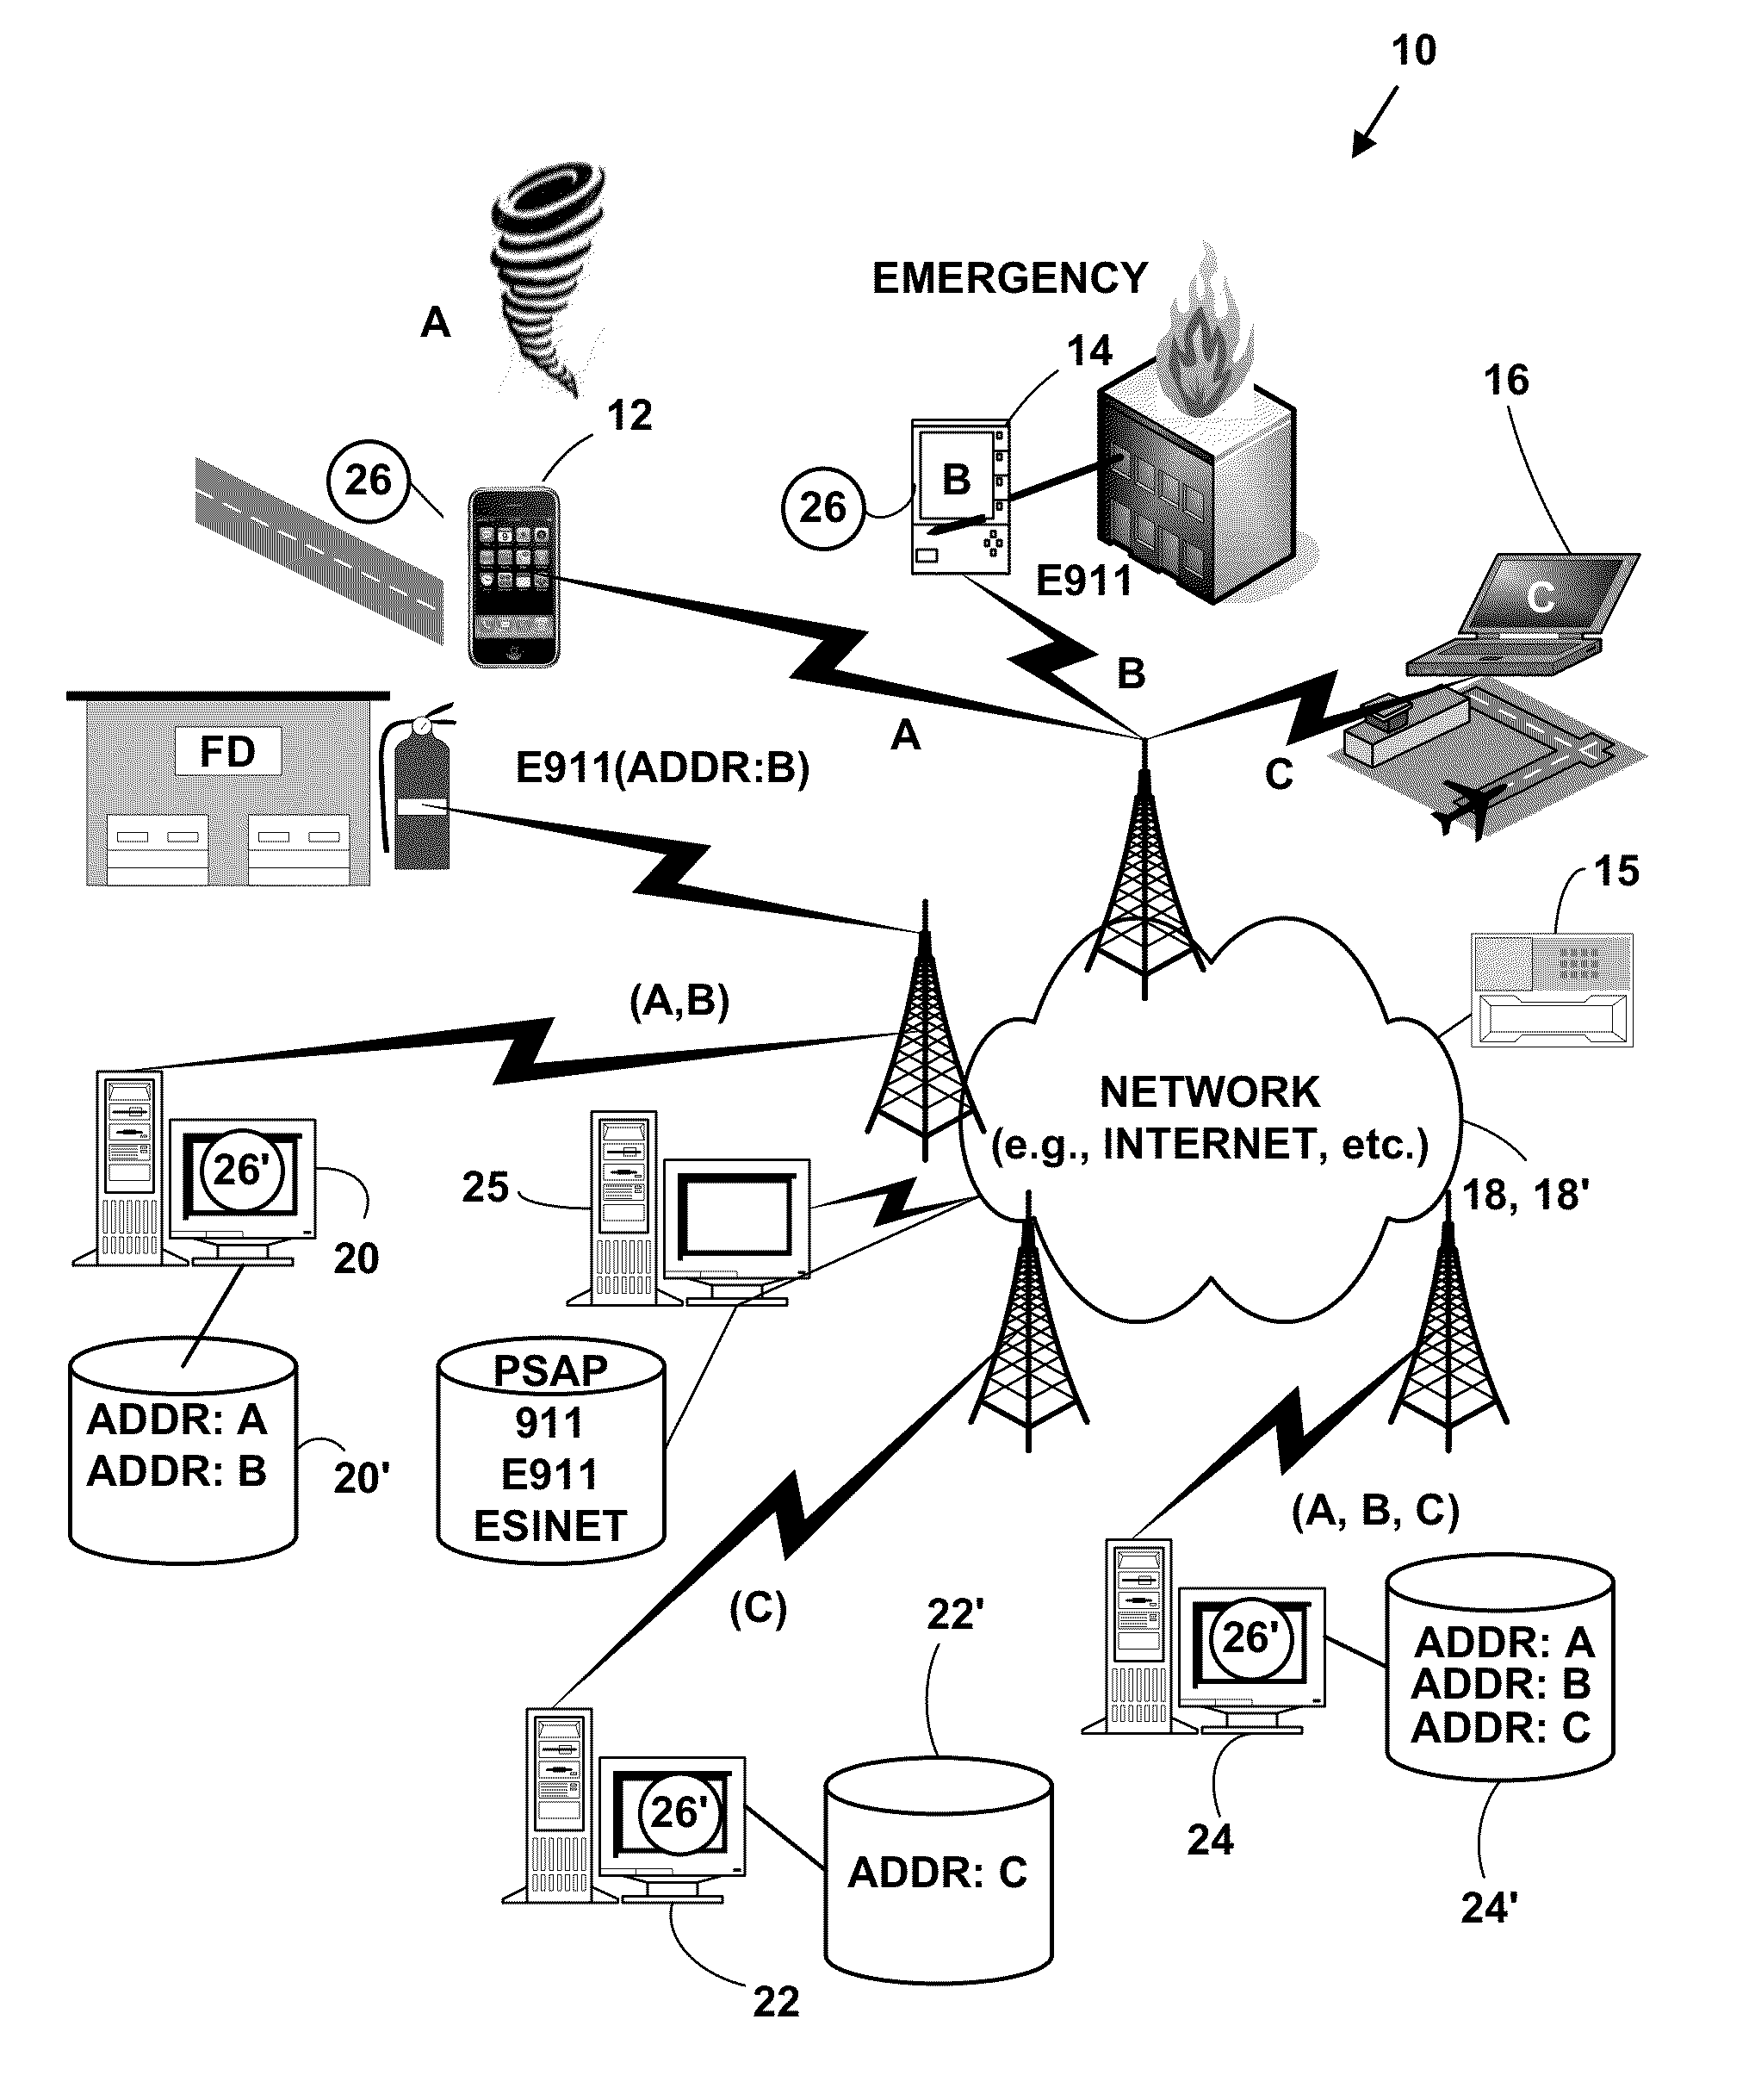 Method and system for an emergency location information service (E-LIS) from wearable devices